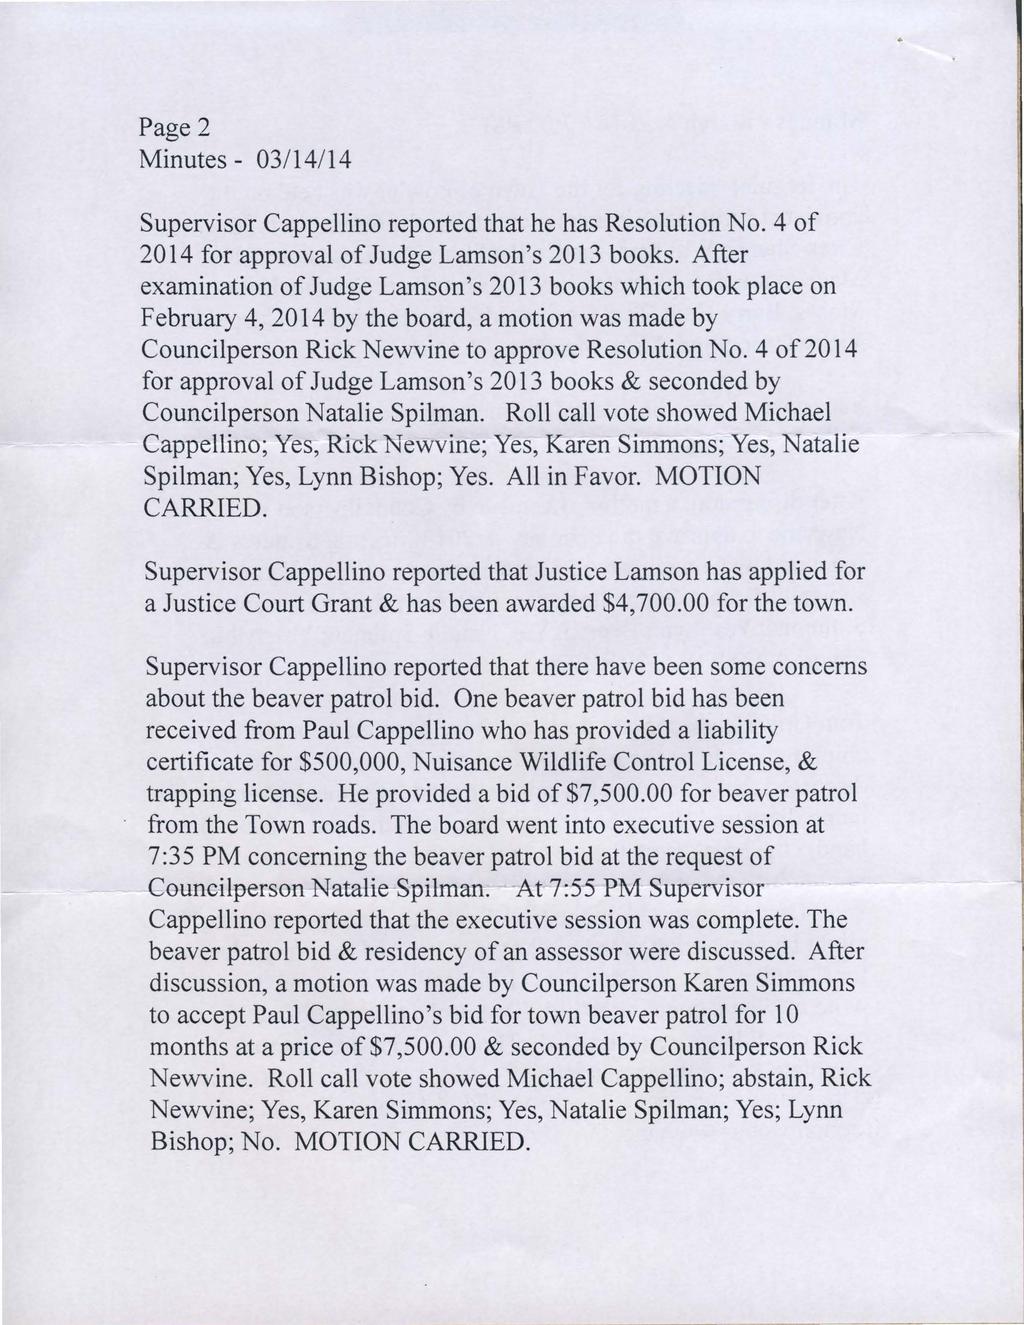 Town Board Meeting - Town of Fowler, NY page 2 Page 2 Minutes - 03/14/14 Supervisor Cappellino reported that he has Resolution No. 4 of 2014 for approval of Judge Lamson's 2013 books.